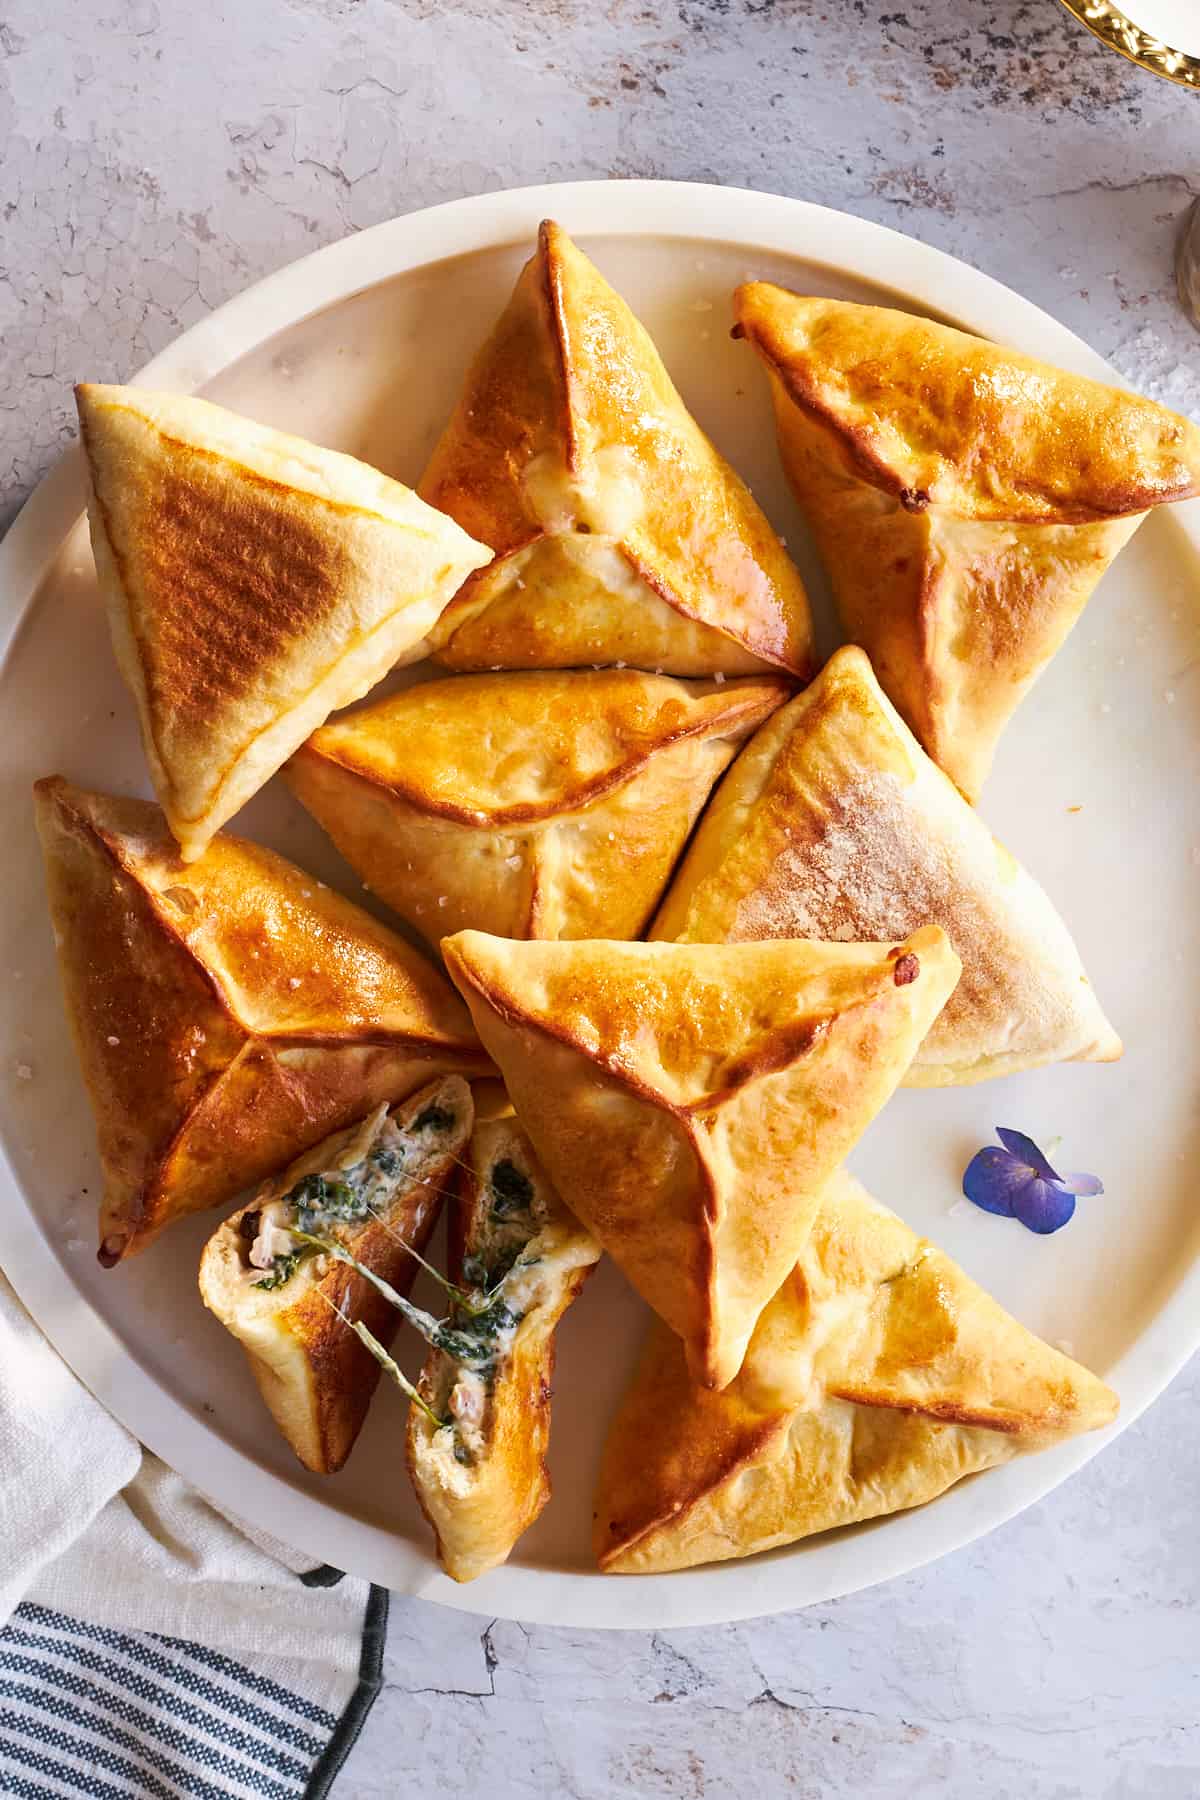 Baked fatayer on a plate.